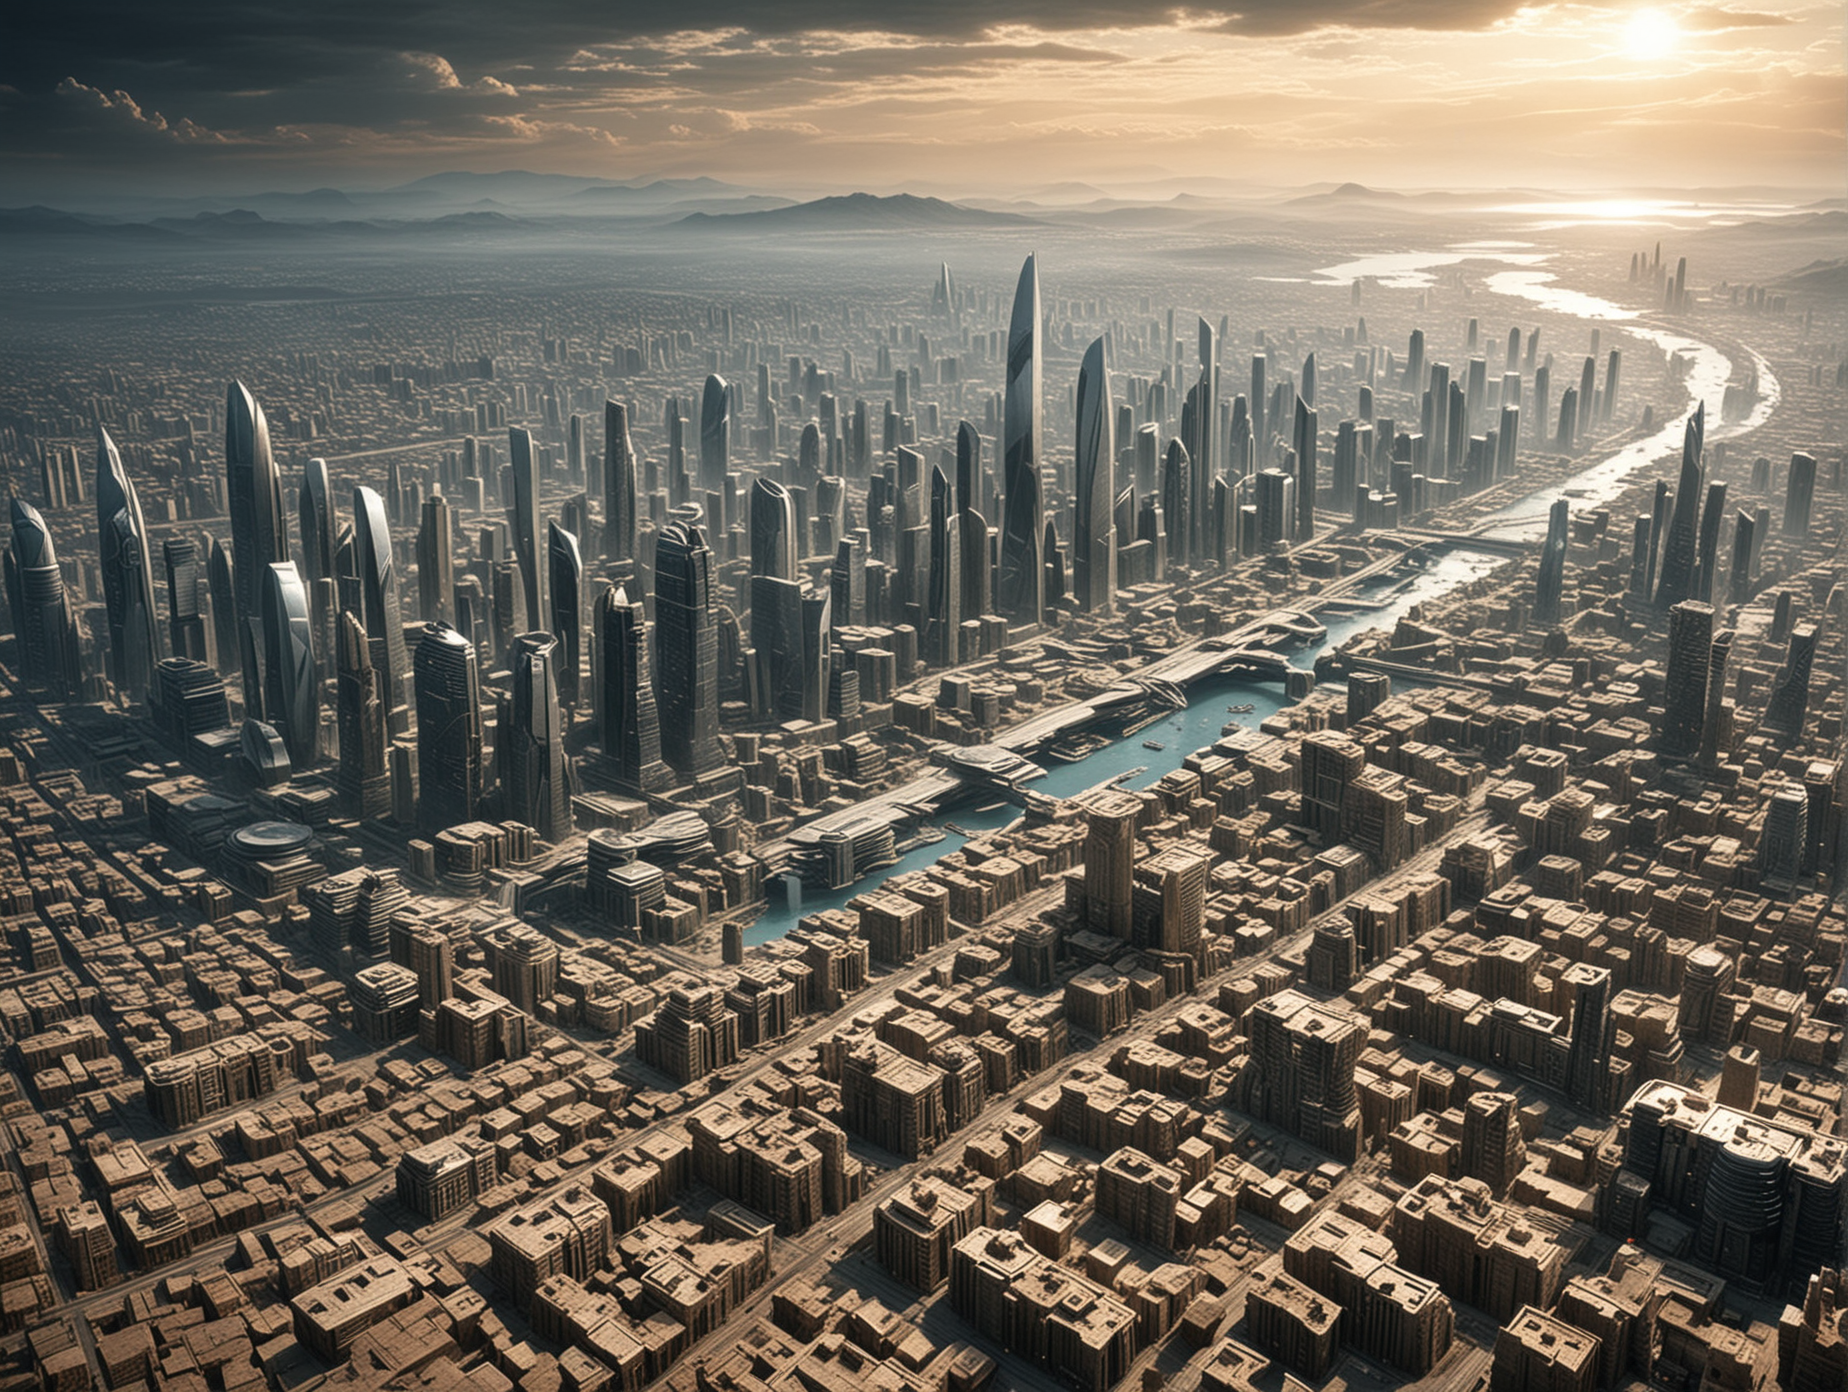 Futuristic City Construction with Ancient Technology Reviving History